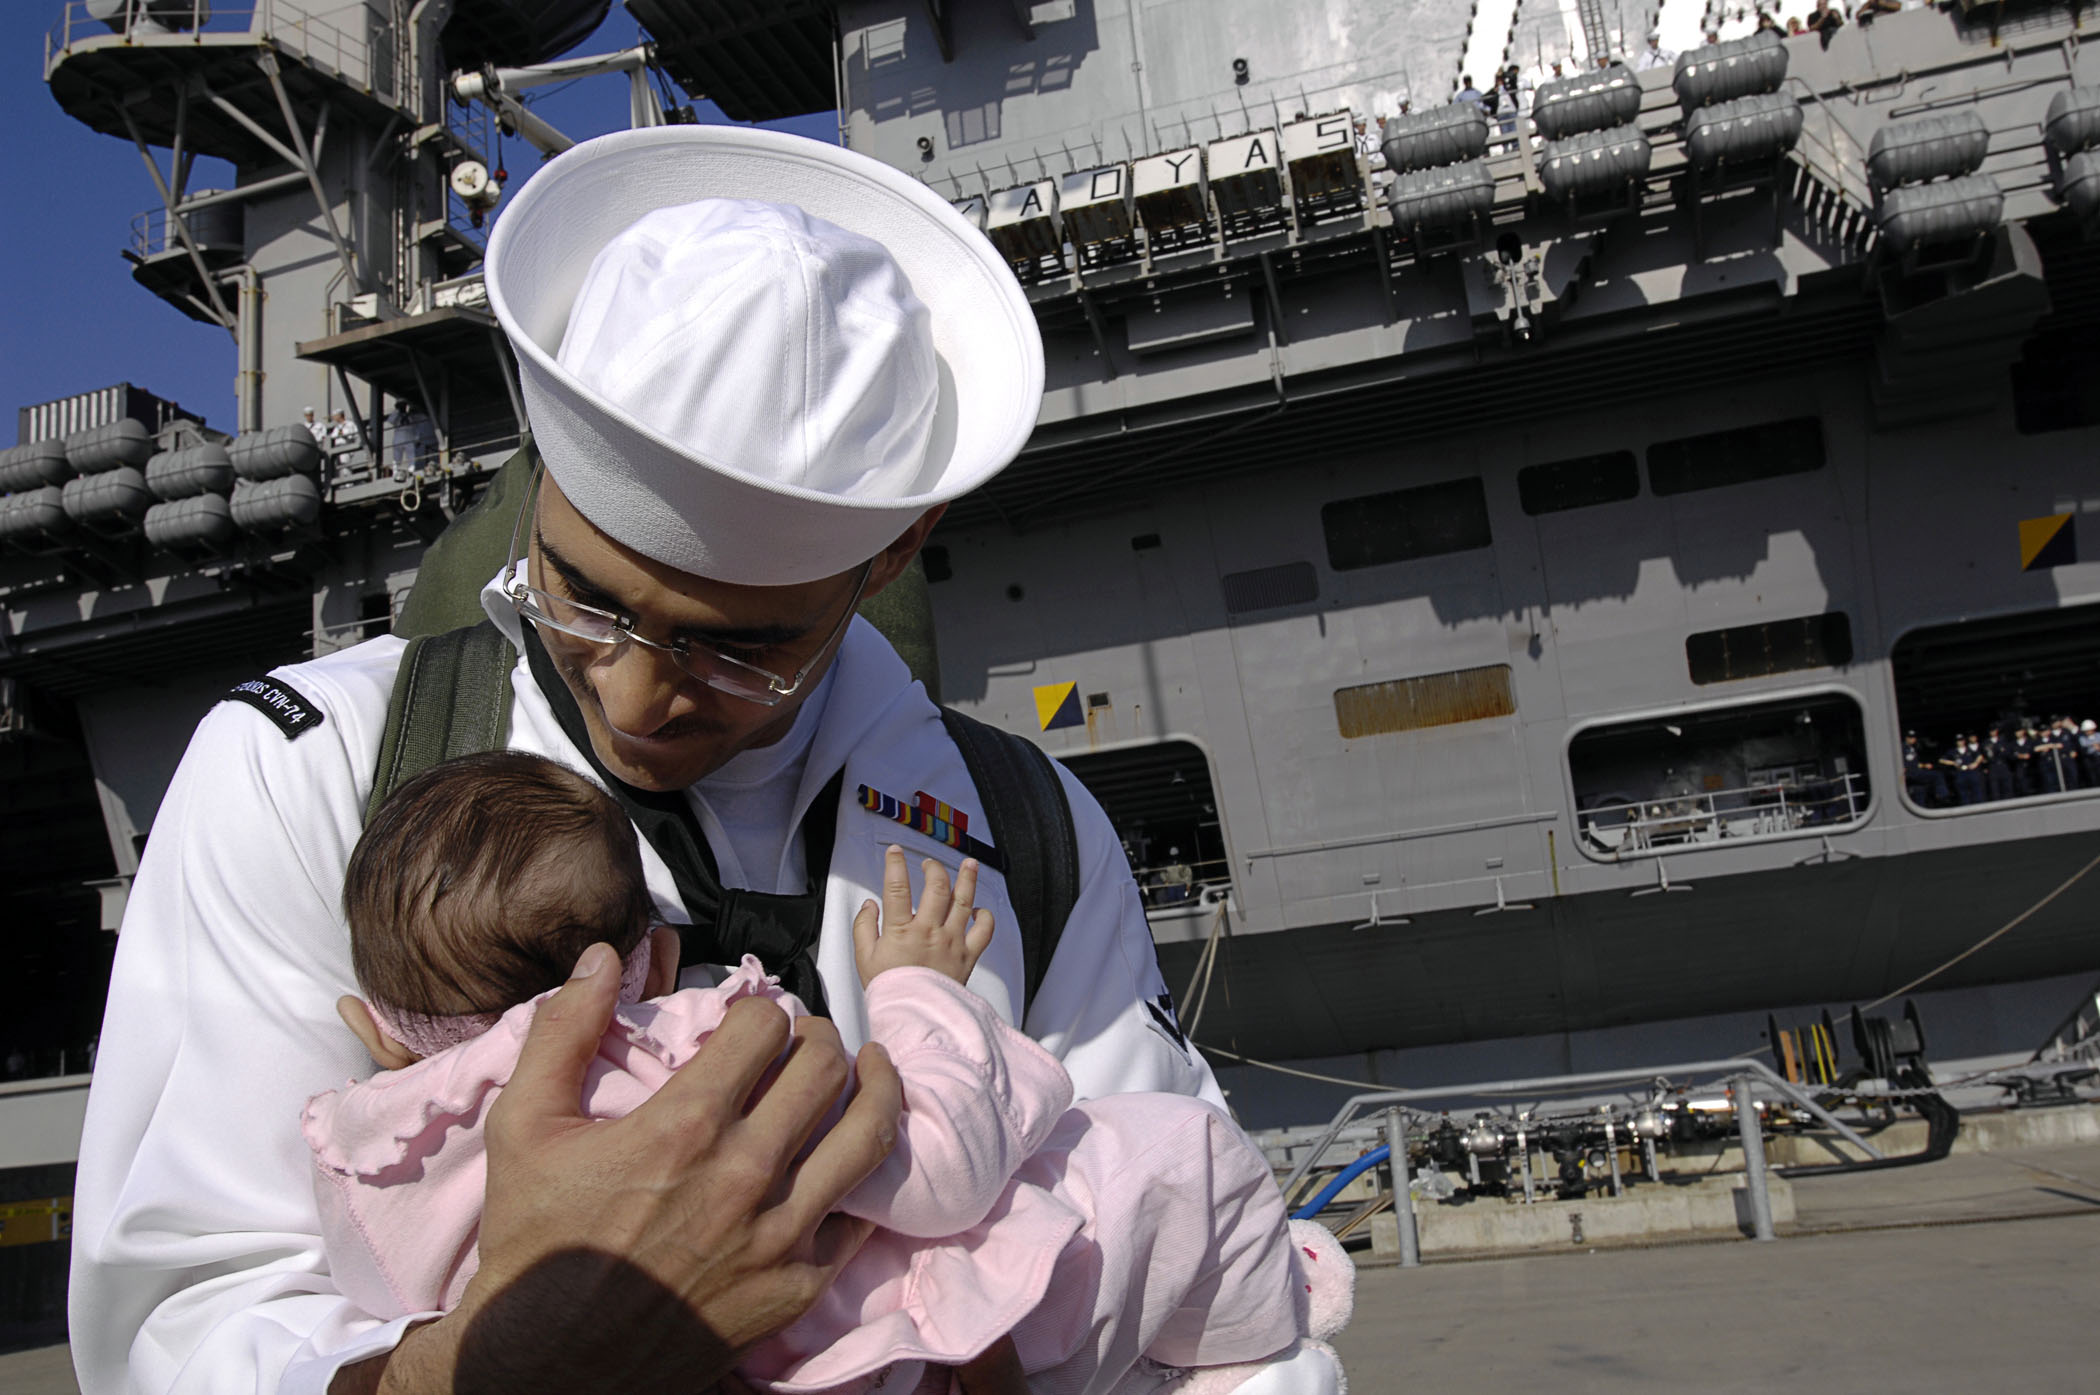 US Navy 090710-N-4954I-041 Aviation Ordnanceman 3rd Class Gilberto Arambul, from Brownsville, Texas, holds his three-and-a-half month-old daughter for the first time